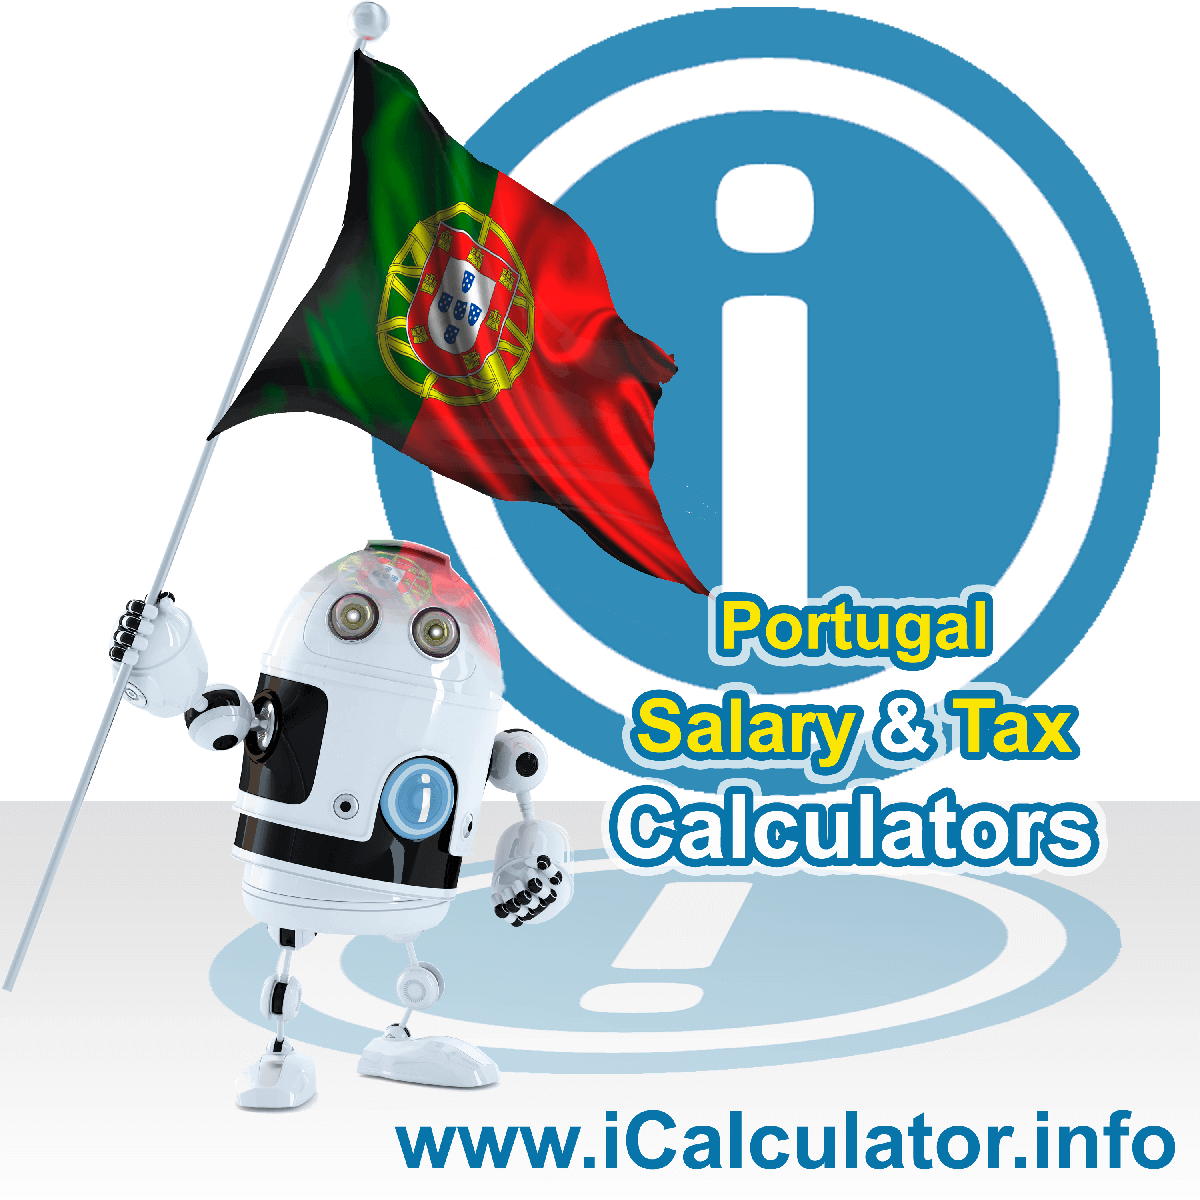 Portugal Tax Calculator. This image shows the Portugal flag and information relating to the tax formula for the Portugal Salary Calculator